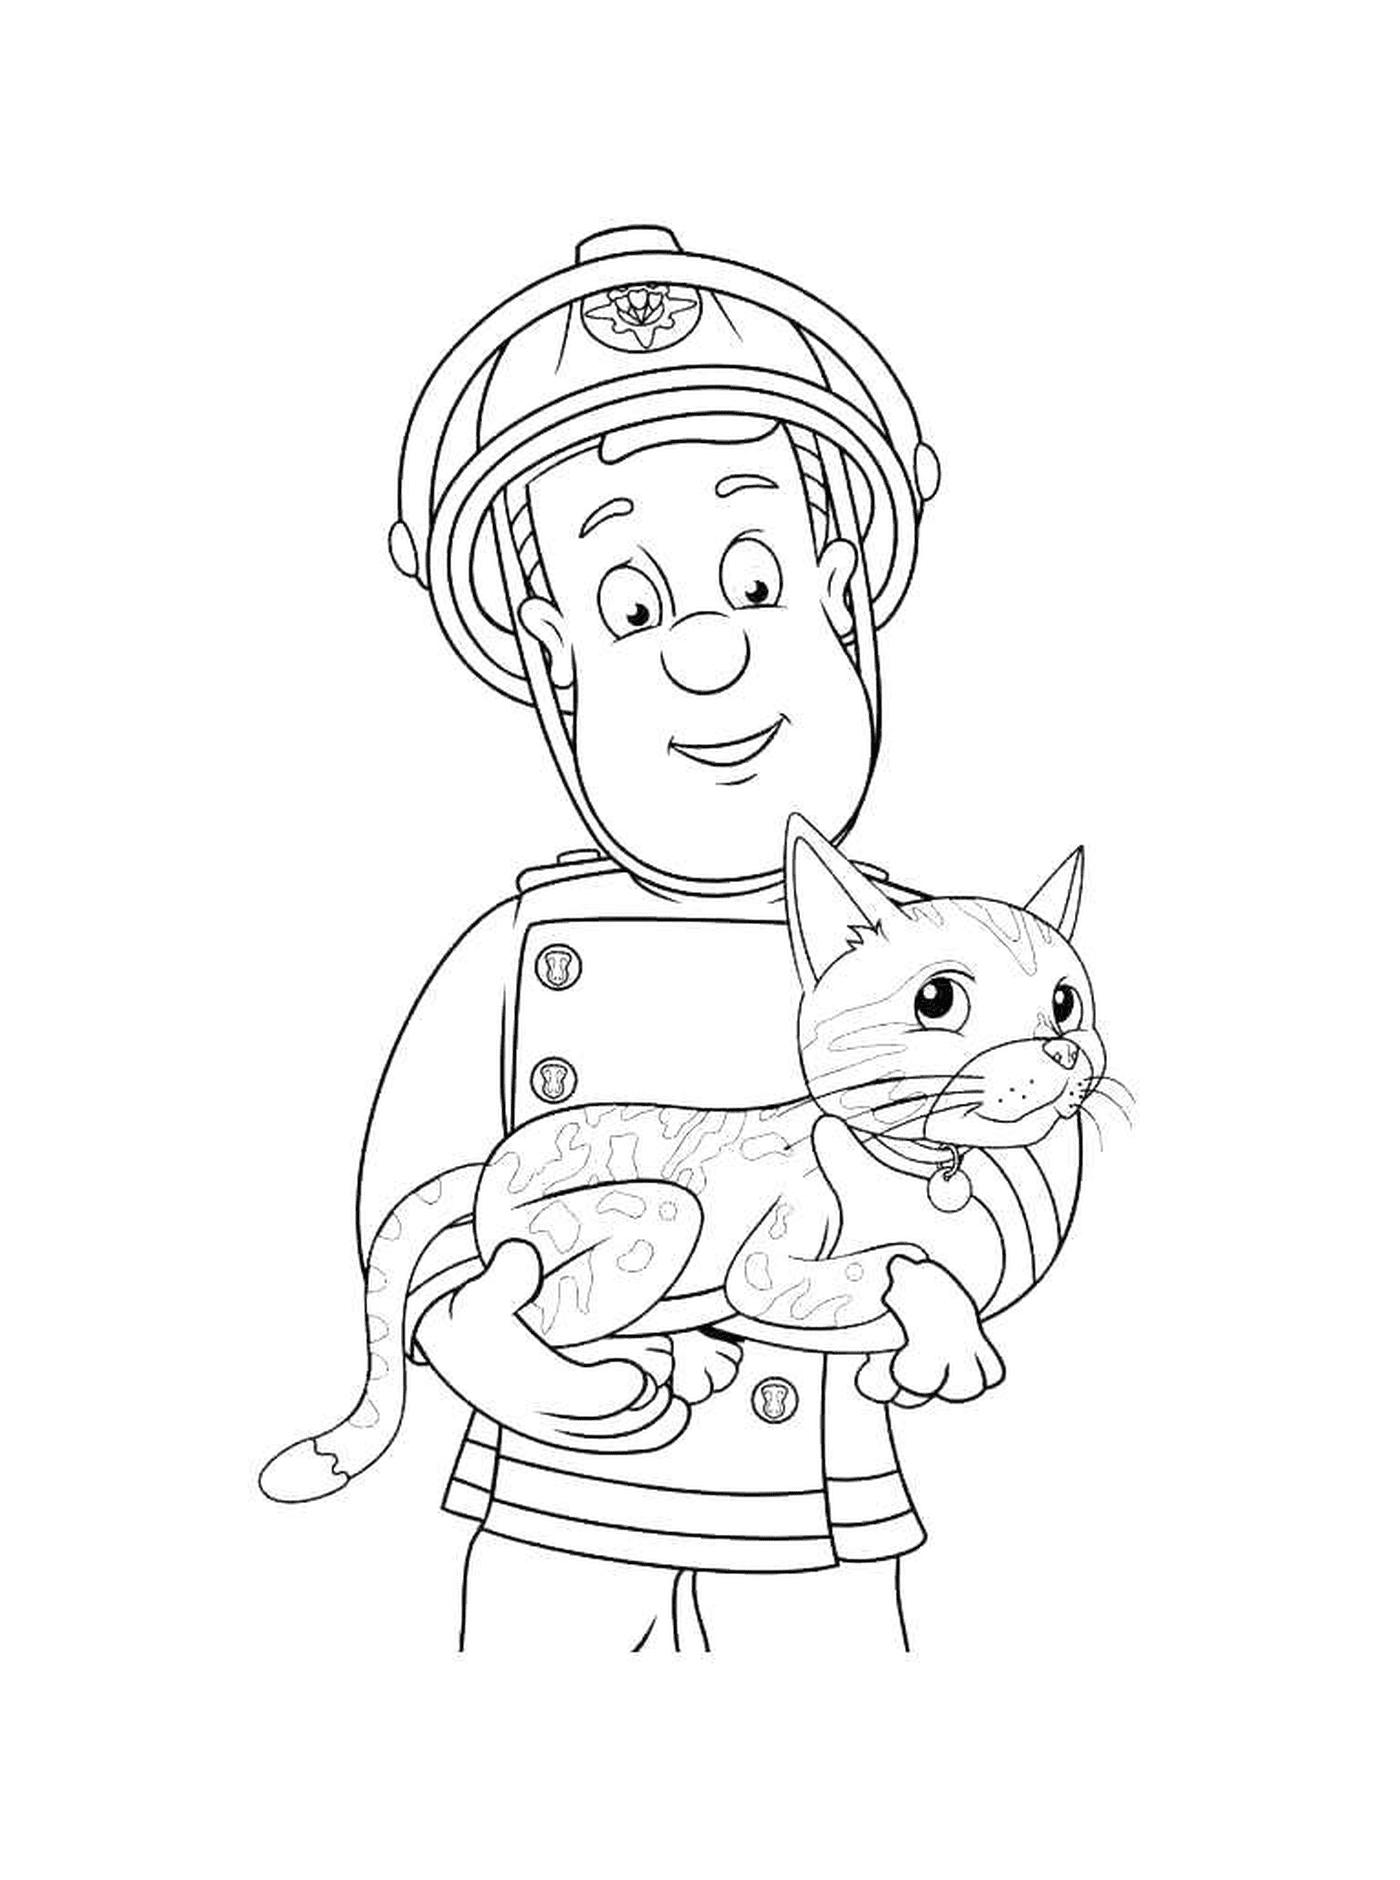  Firefighter holding a cat 